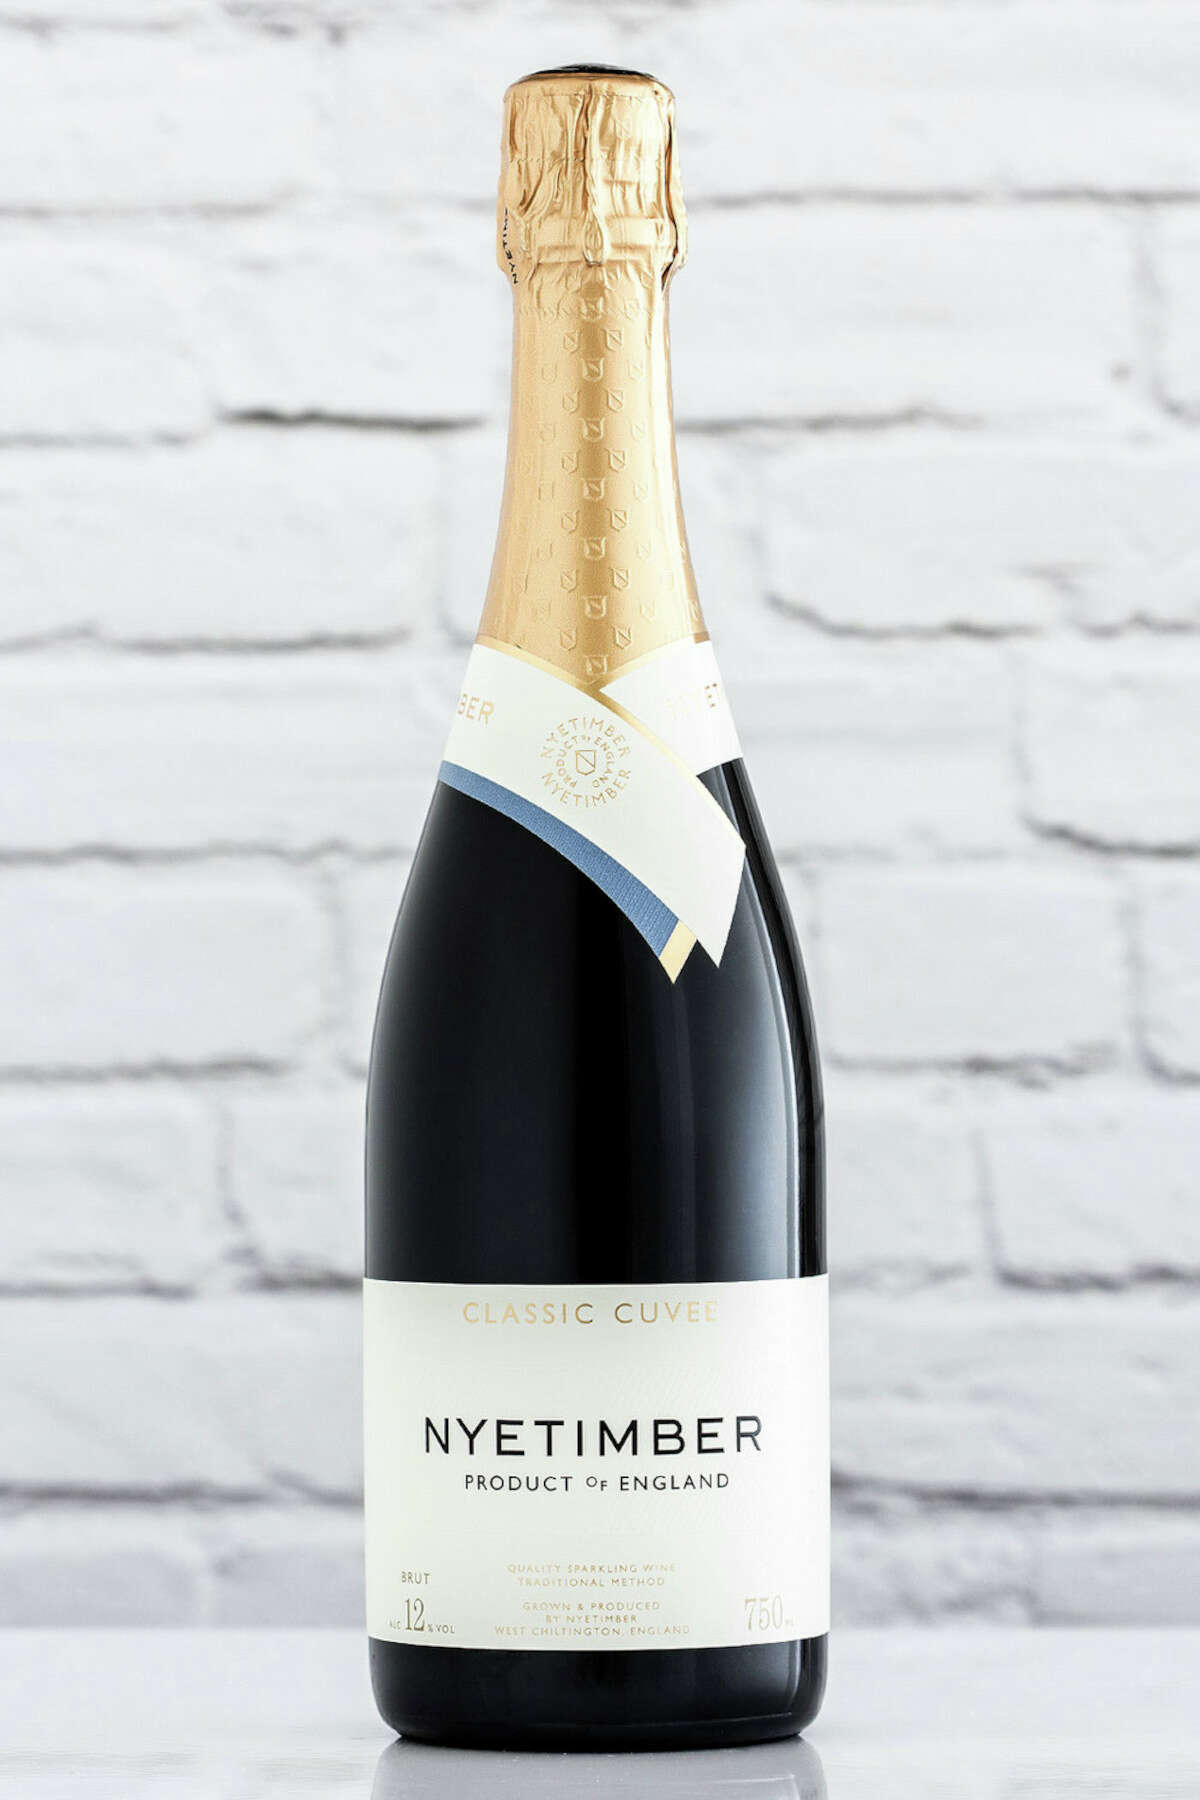 Nyetimber Classic Cuvee, available at Putnam Wine in Saratoga Springs, is made in England. (Provided photo.)